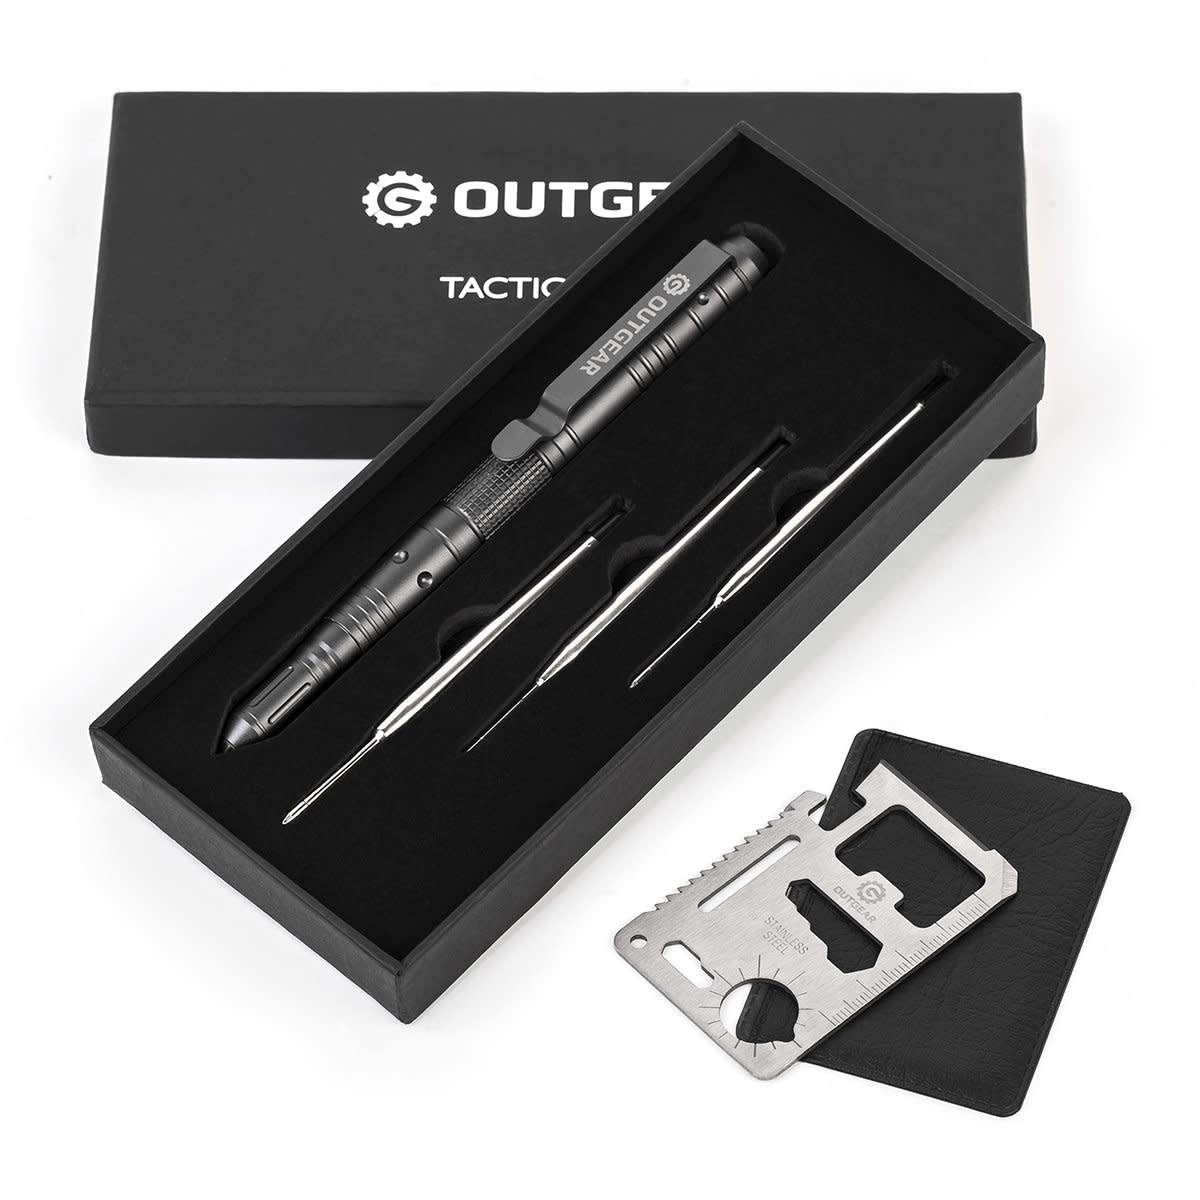 Tactical Pen with 3 Replaceable Ink Made of Aircraft Aluminum Alloy Self Defense